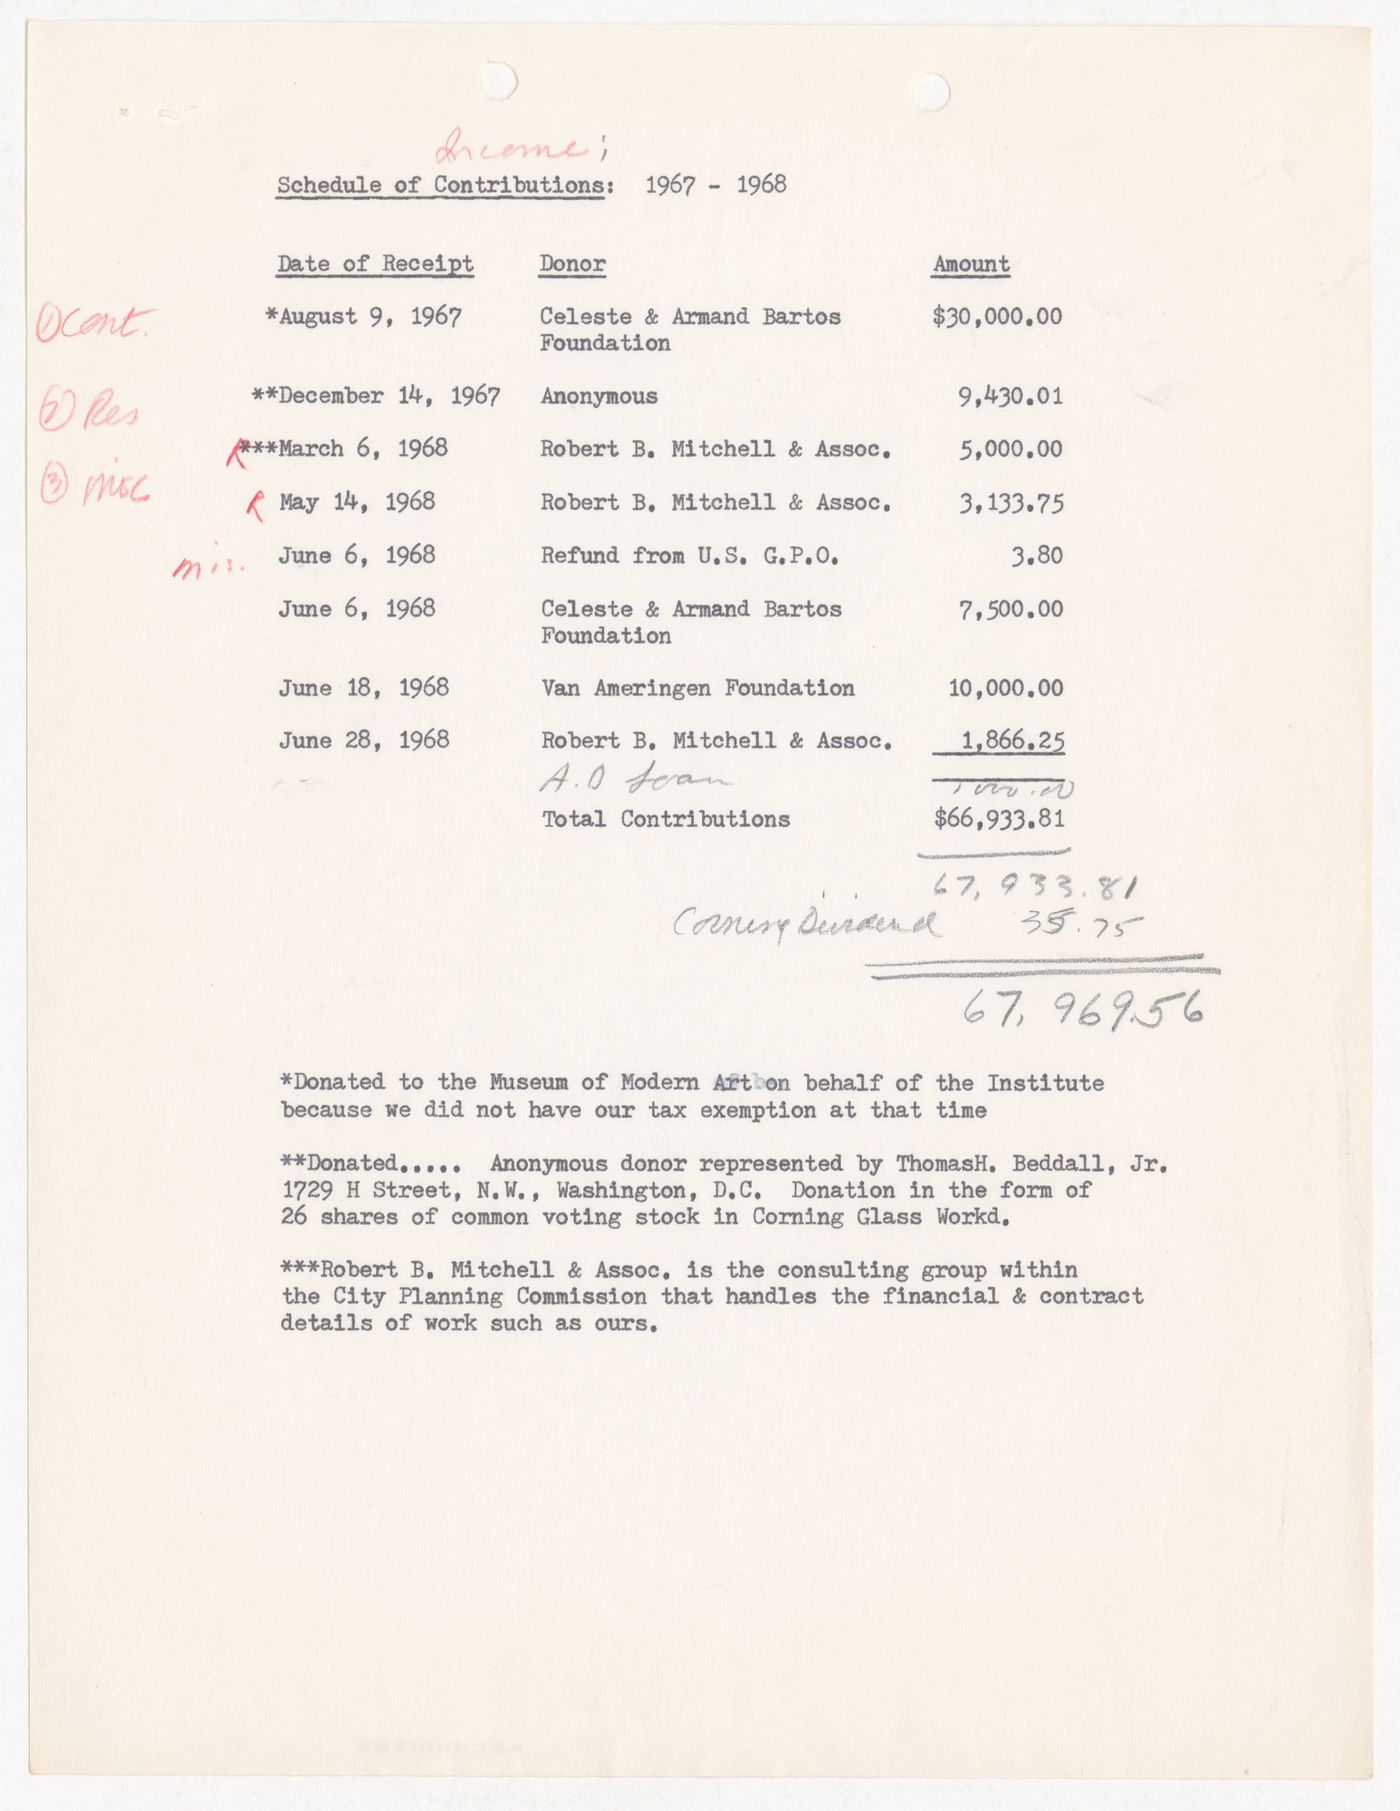 Schedule of contributions for 1967-1968 with annotations